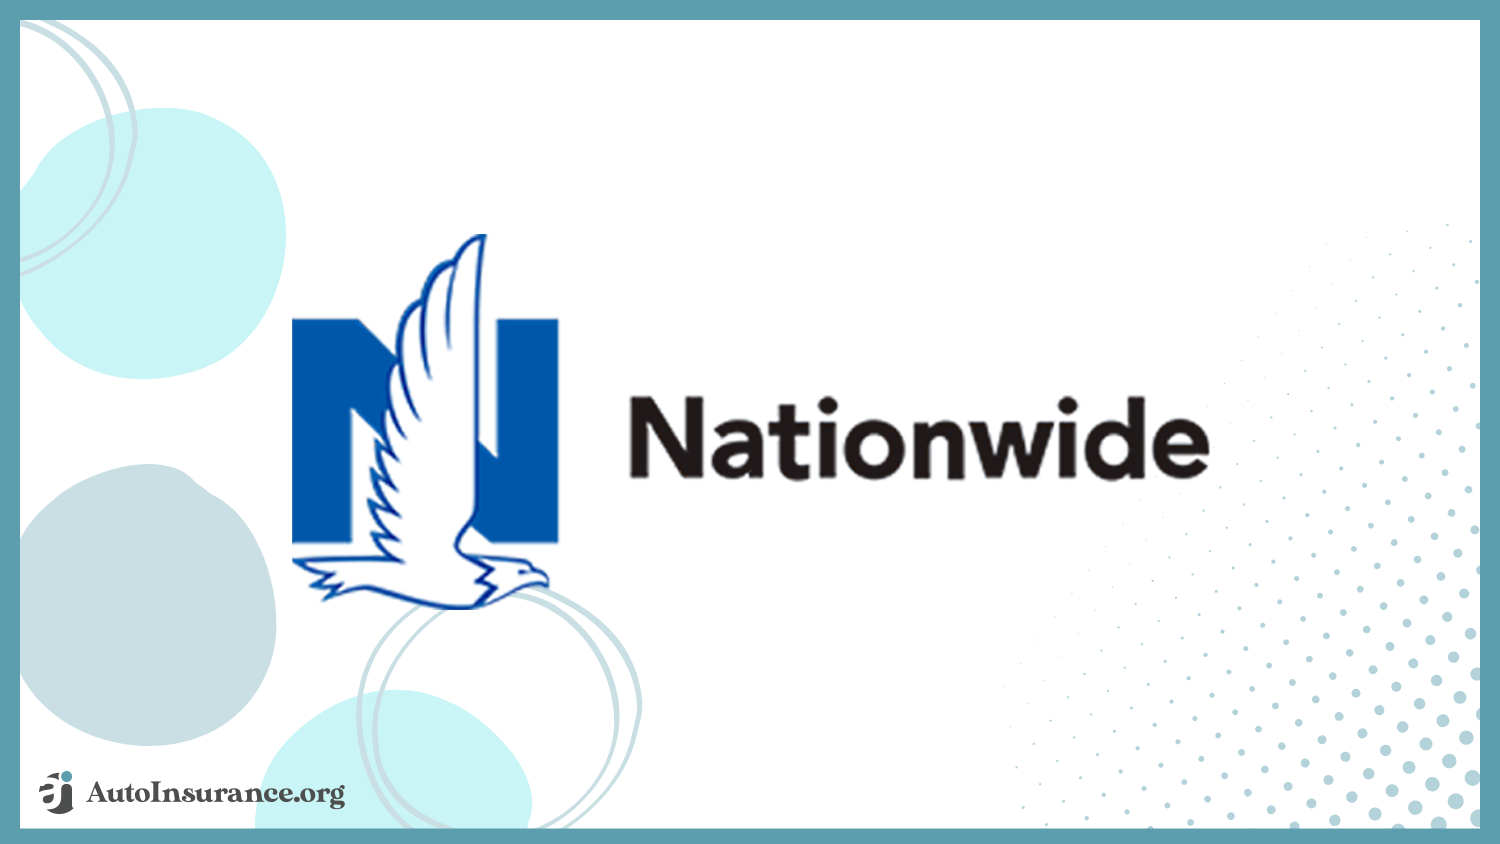 Nationwide: cheap auto insurance for union members